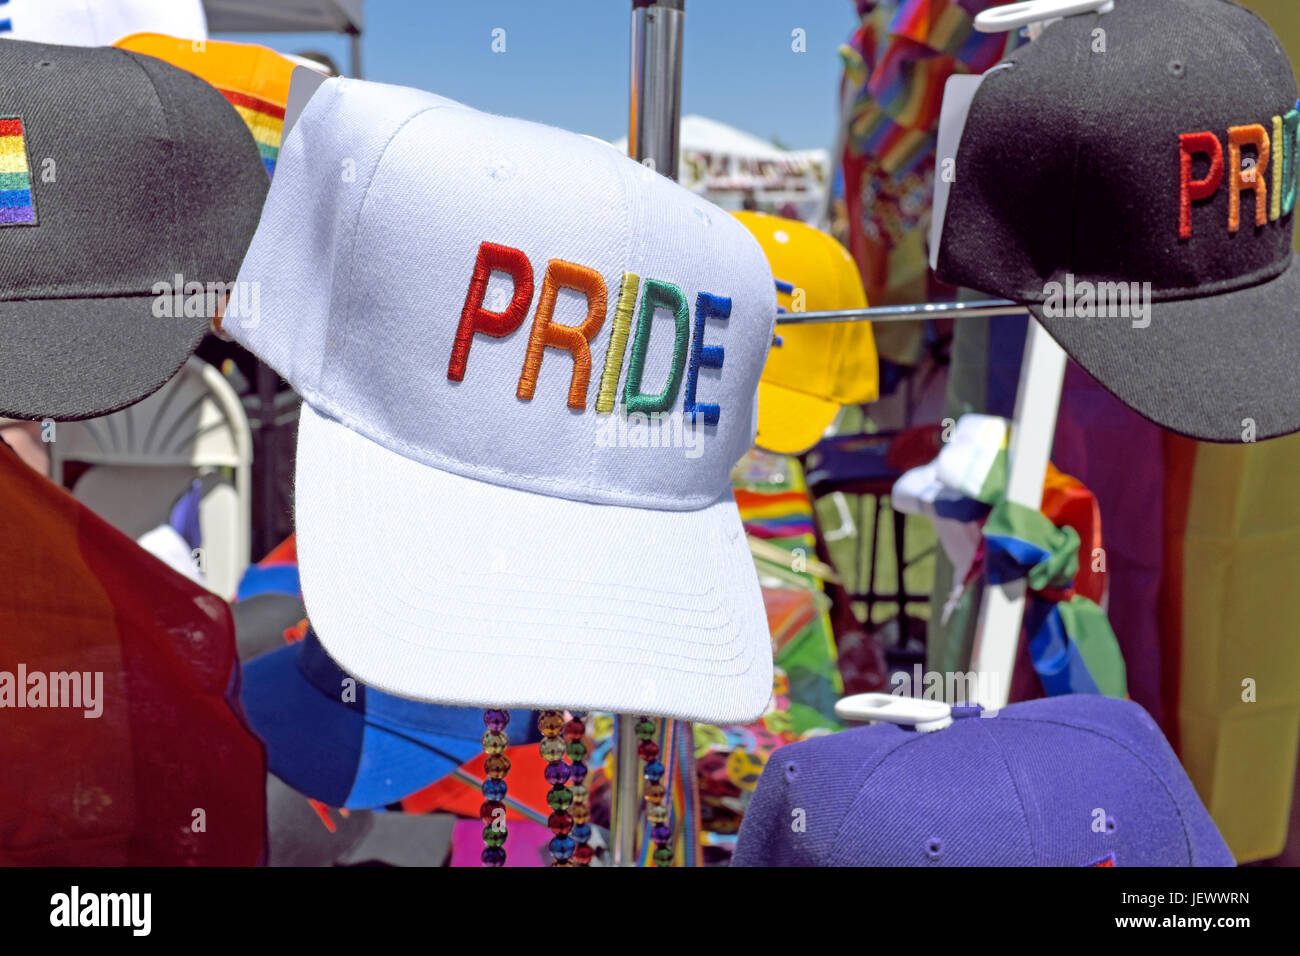 LGBT Pride merchandise on sale during the June 2017 LGBT Pride parade in Cleveland, Ohio, USA. Stock Photo